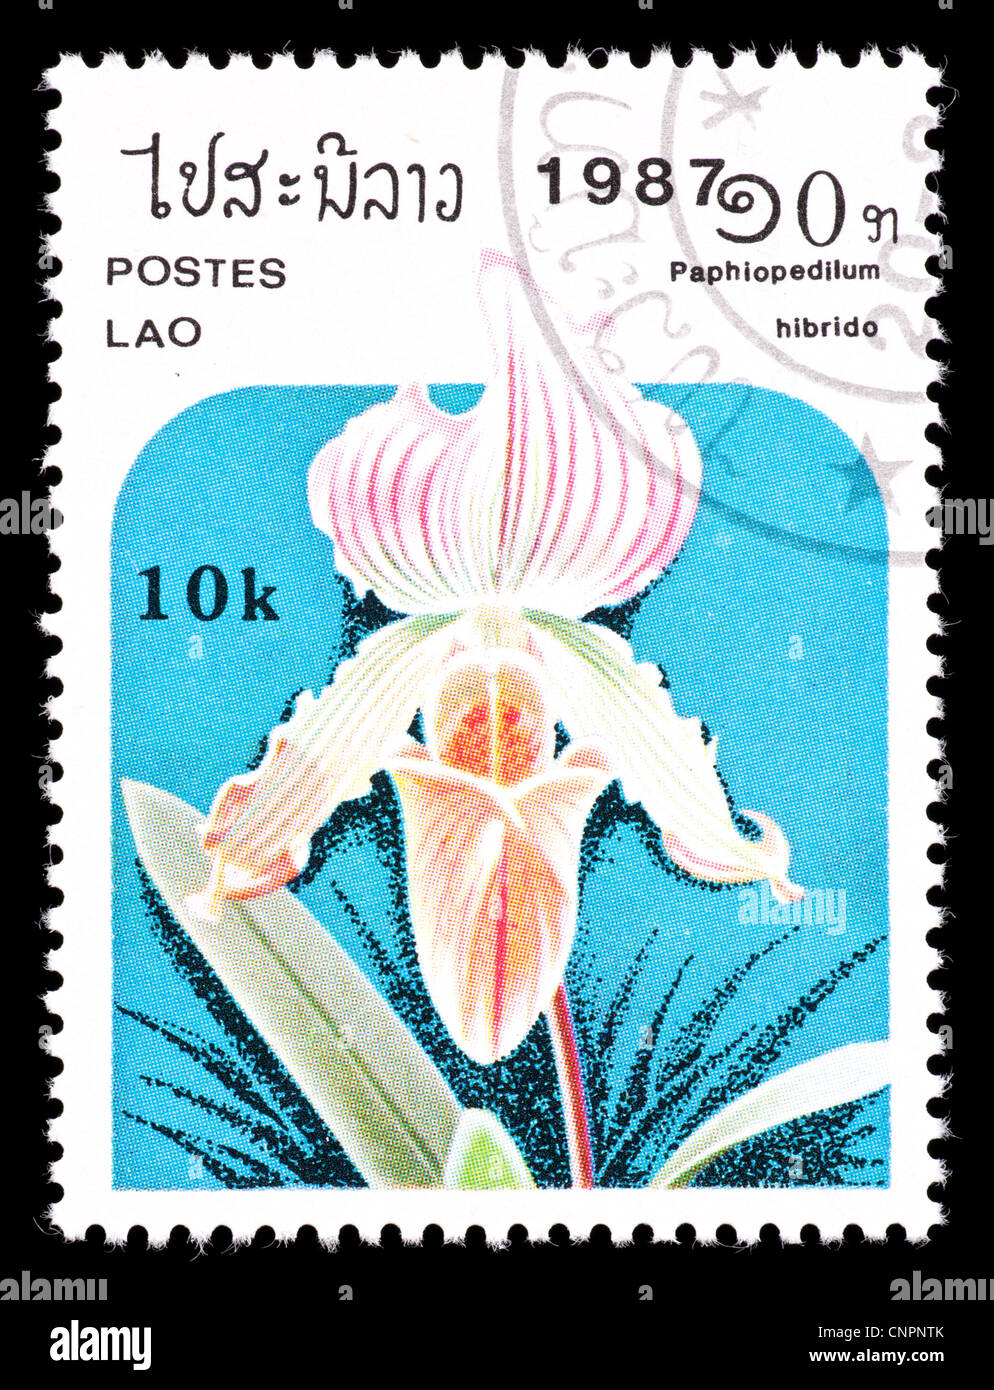 Postage stamp from Laos depicting an orchid (Paphiopedilum hybrid) Stock Photo